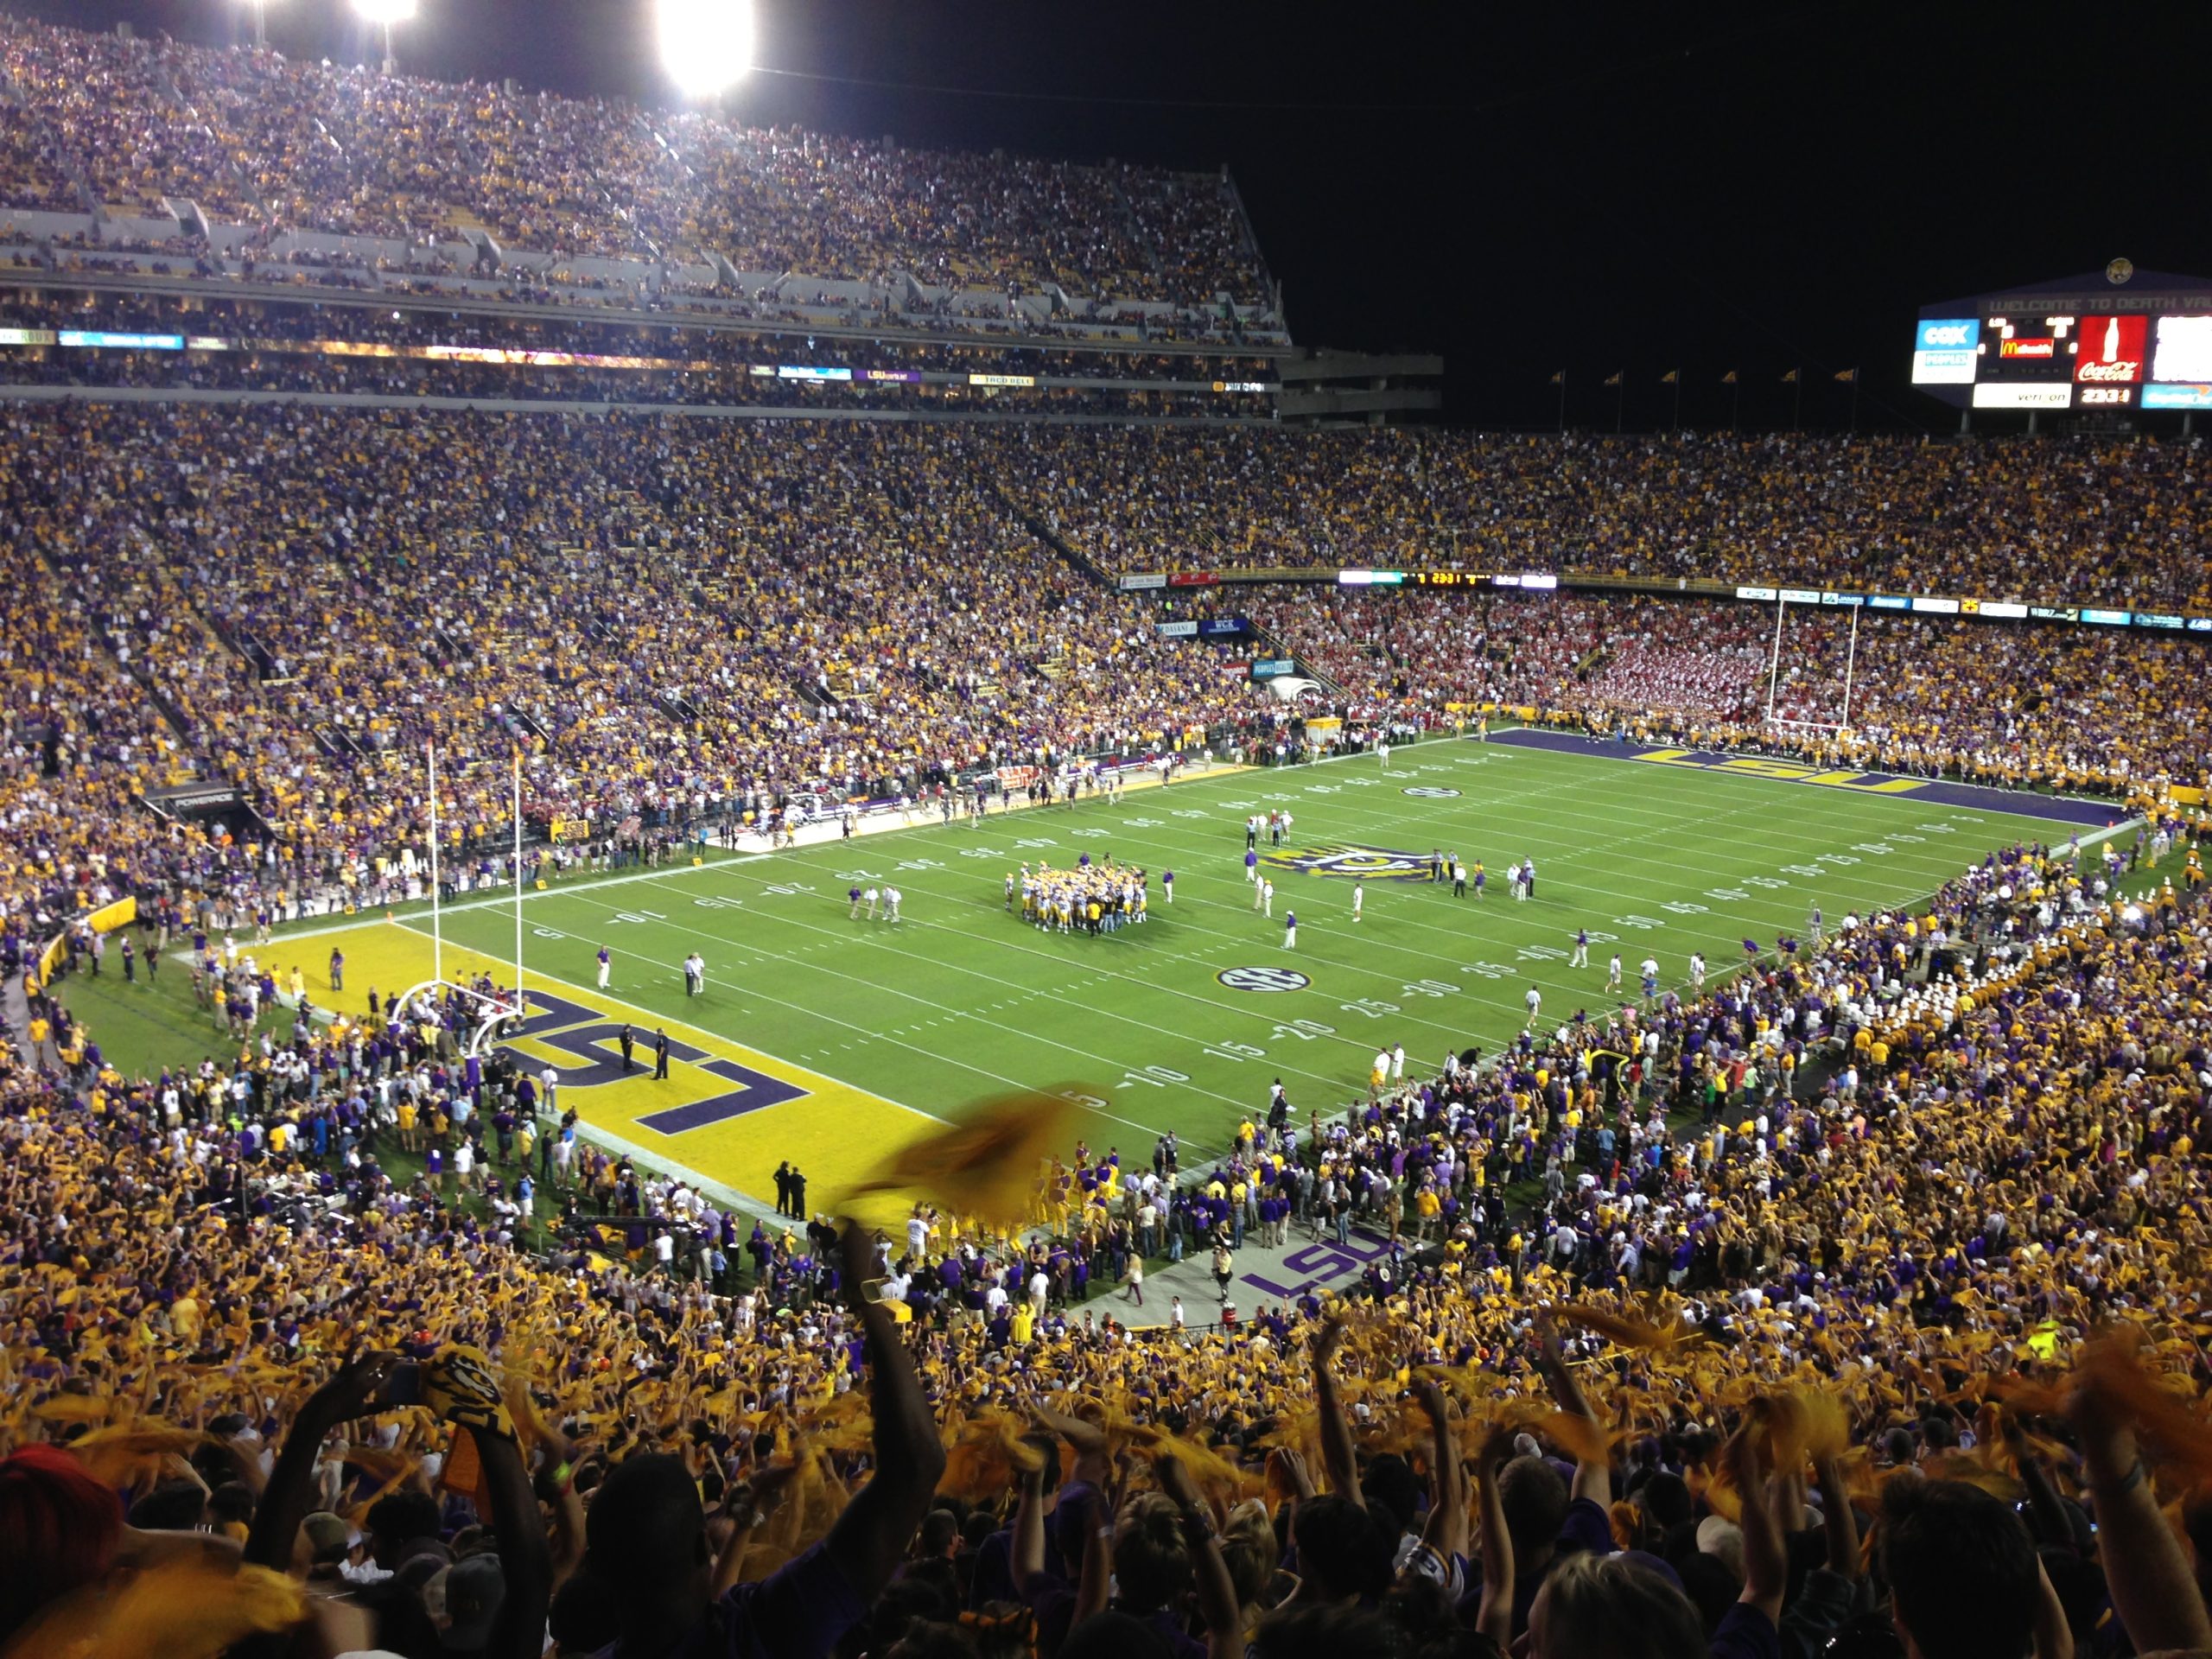 LSU to crack down on student IDs at upcoming football game